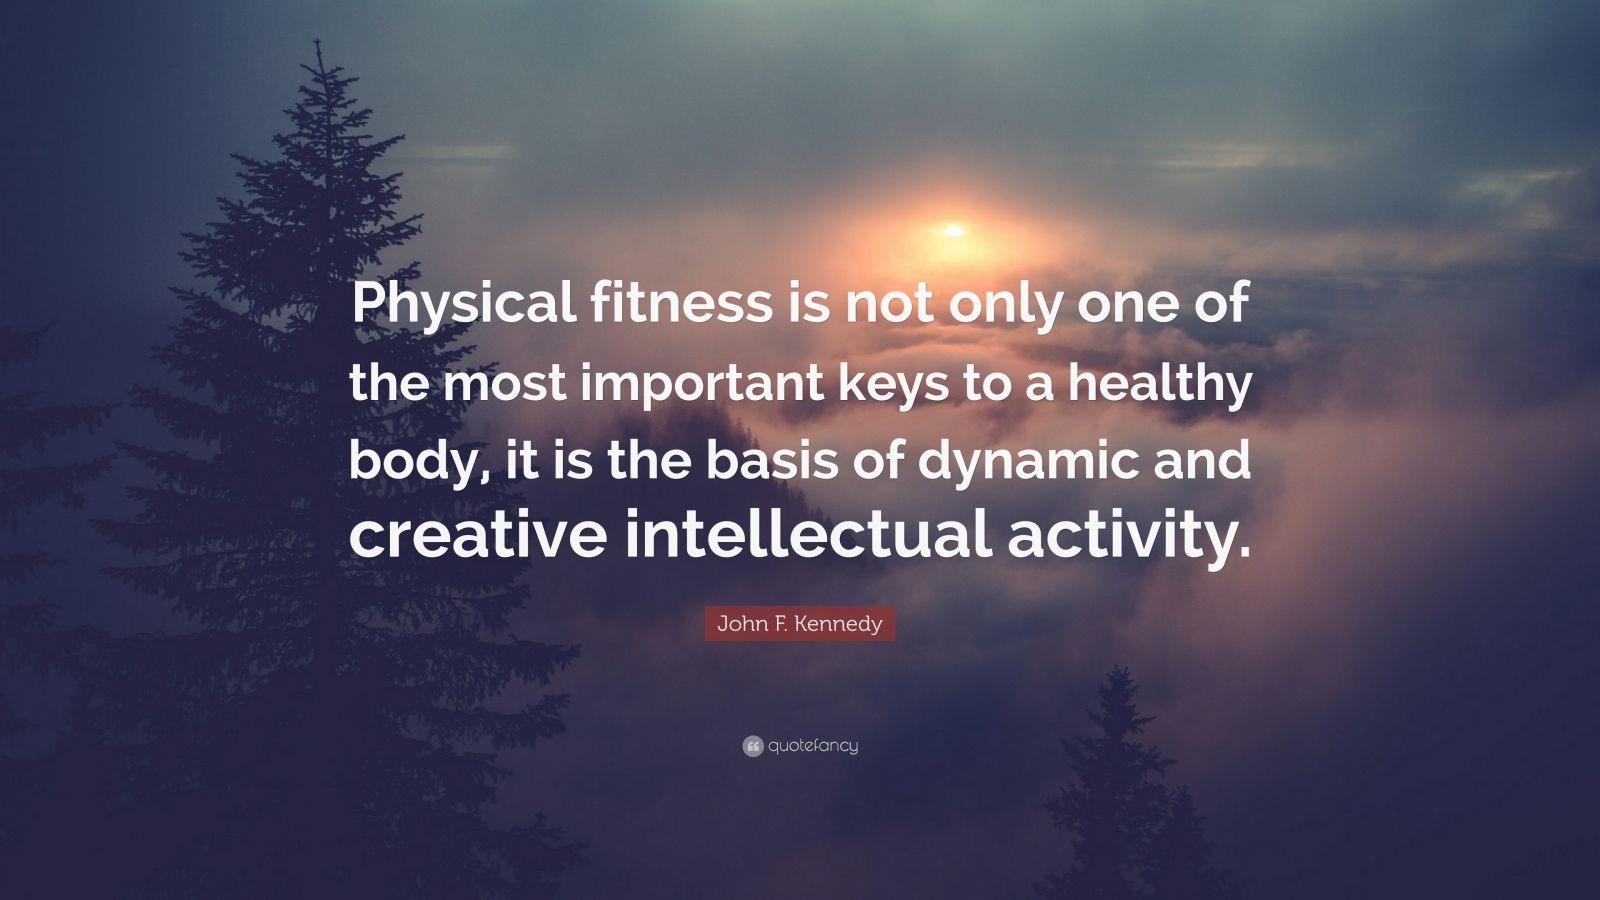 John F. Kennedy Quote: “Physical fitness is not only one of the most ...